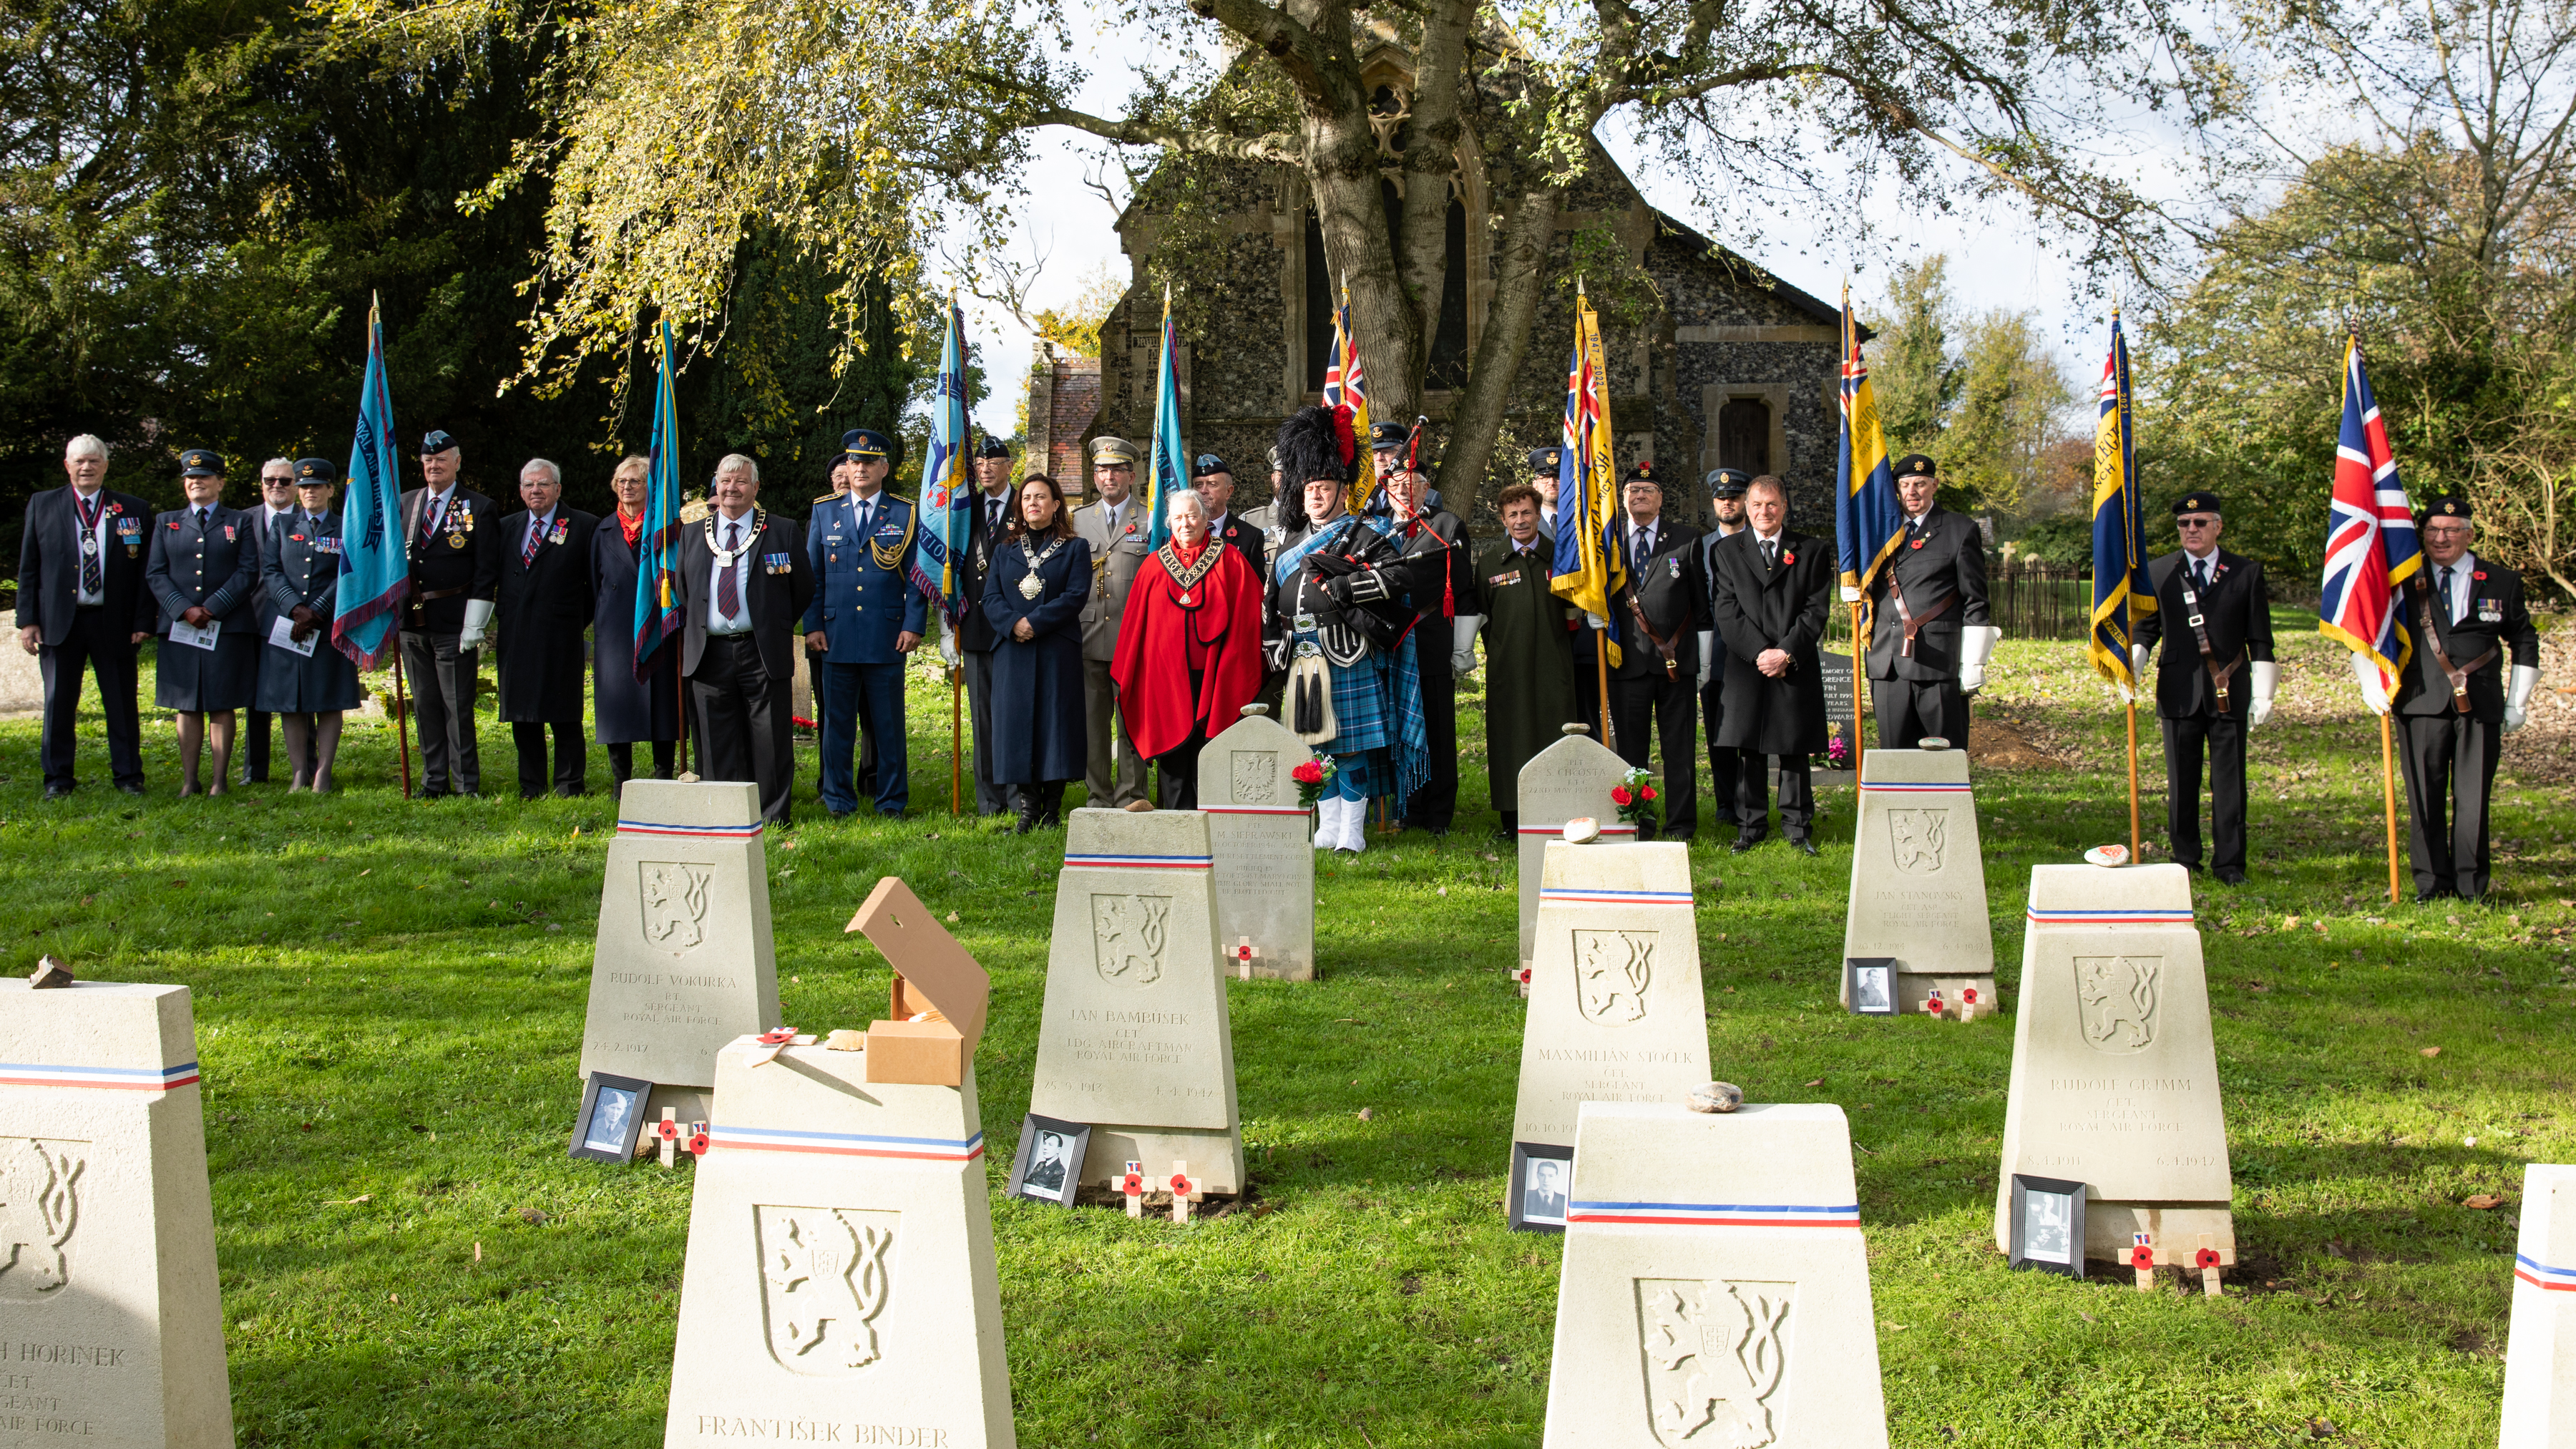 Image shows RAF aviators standing by gravestones during Remembrance Service.